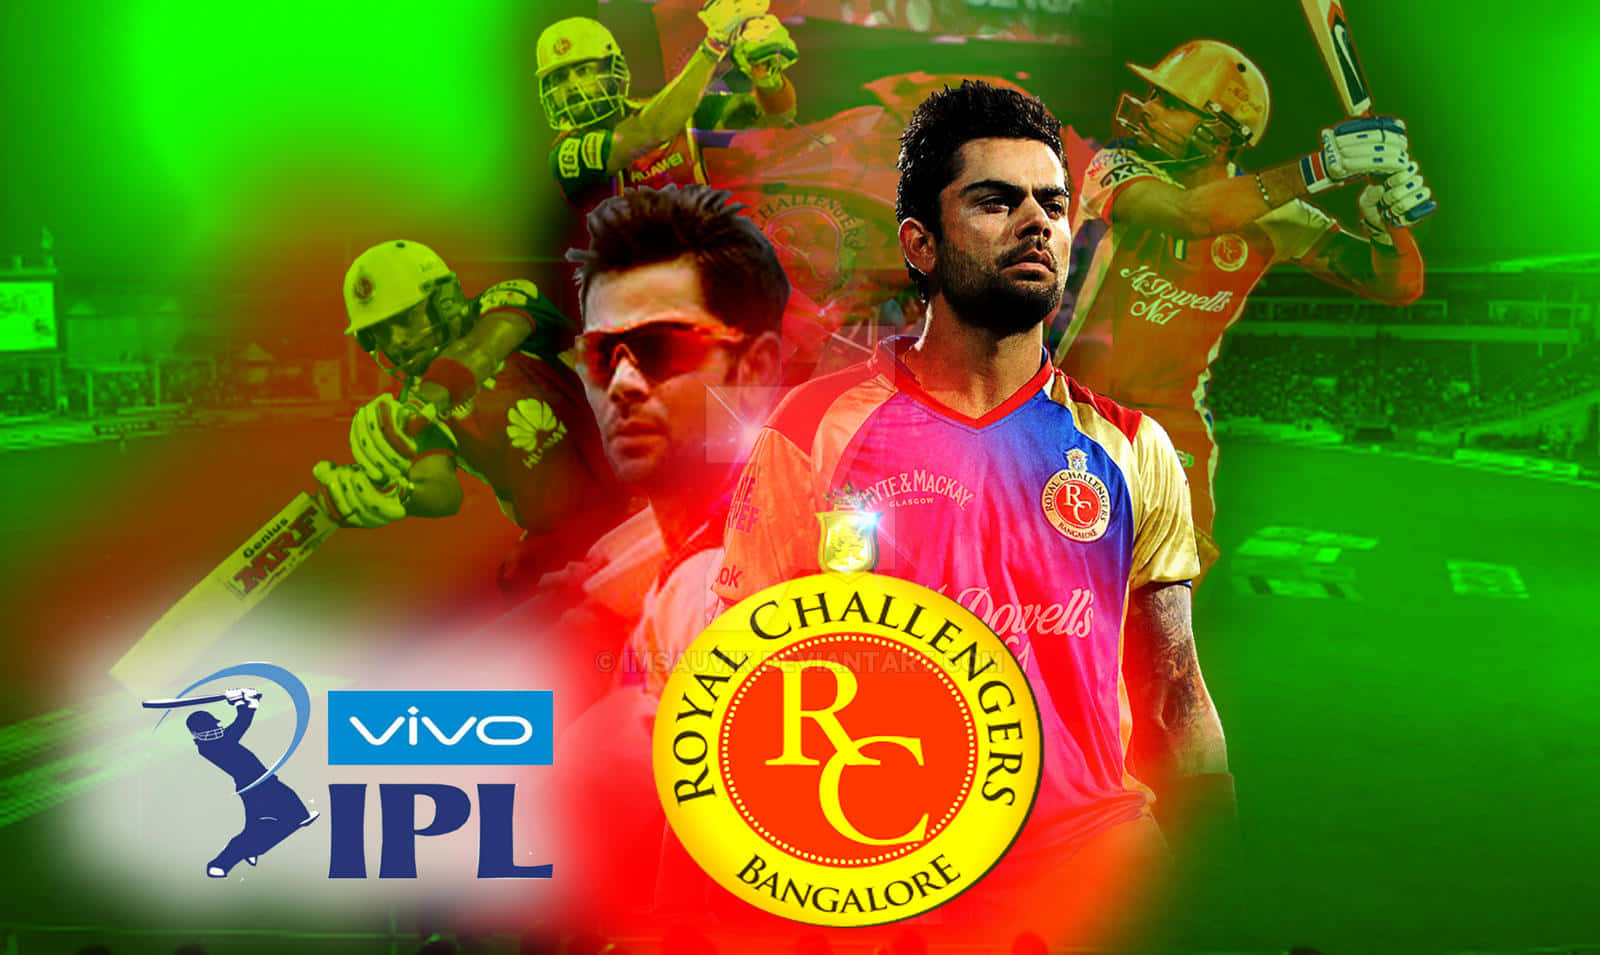 Apoieo Royal Challengers Bangalore!